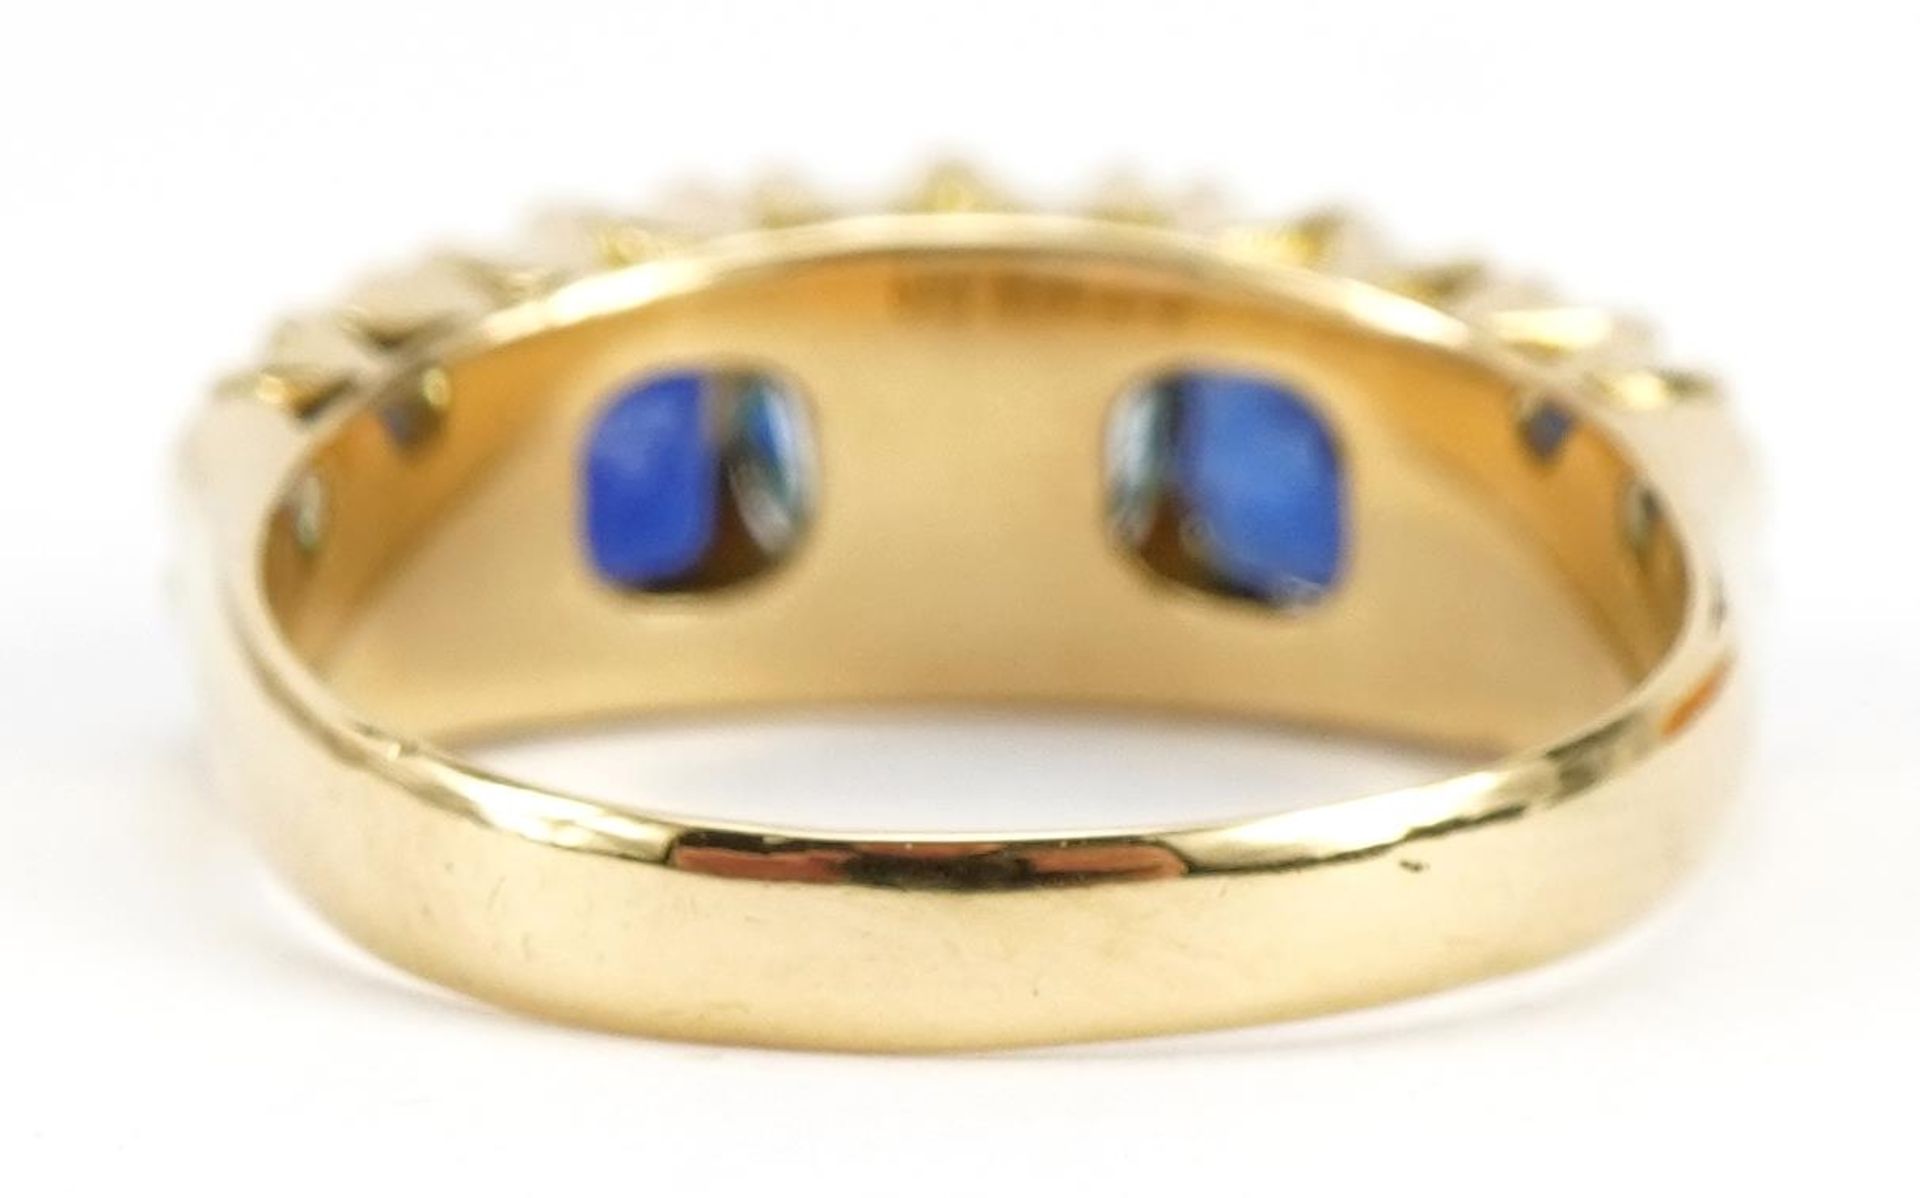 Victorian 18ct gold five stone ring set with blue stones, the largest stone approximately 6.2mm in - Image 2 of 3